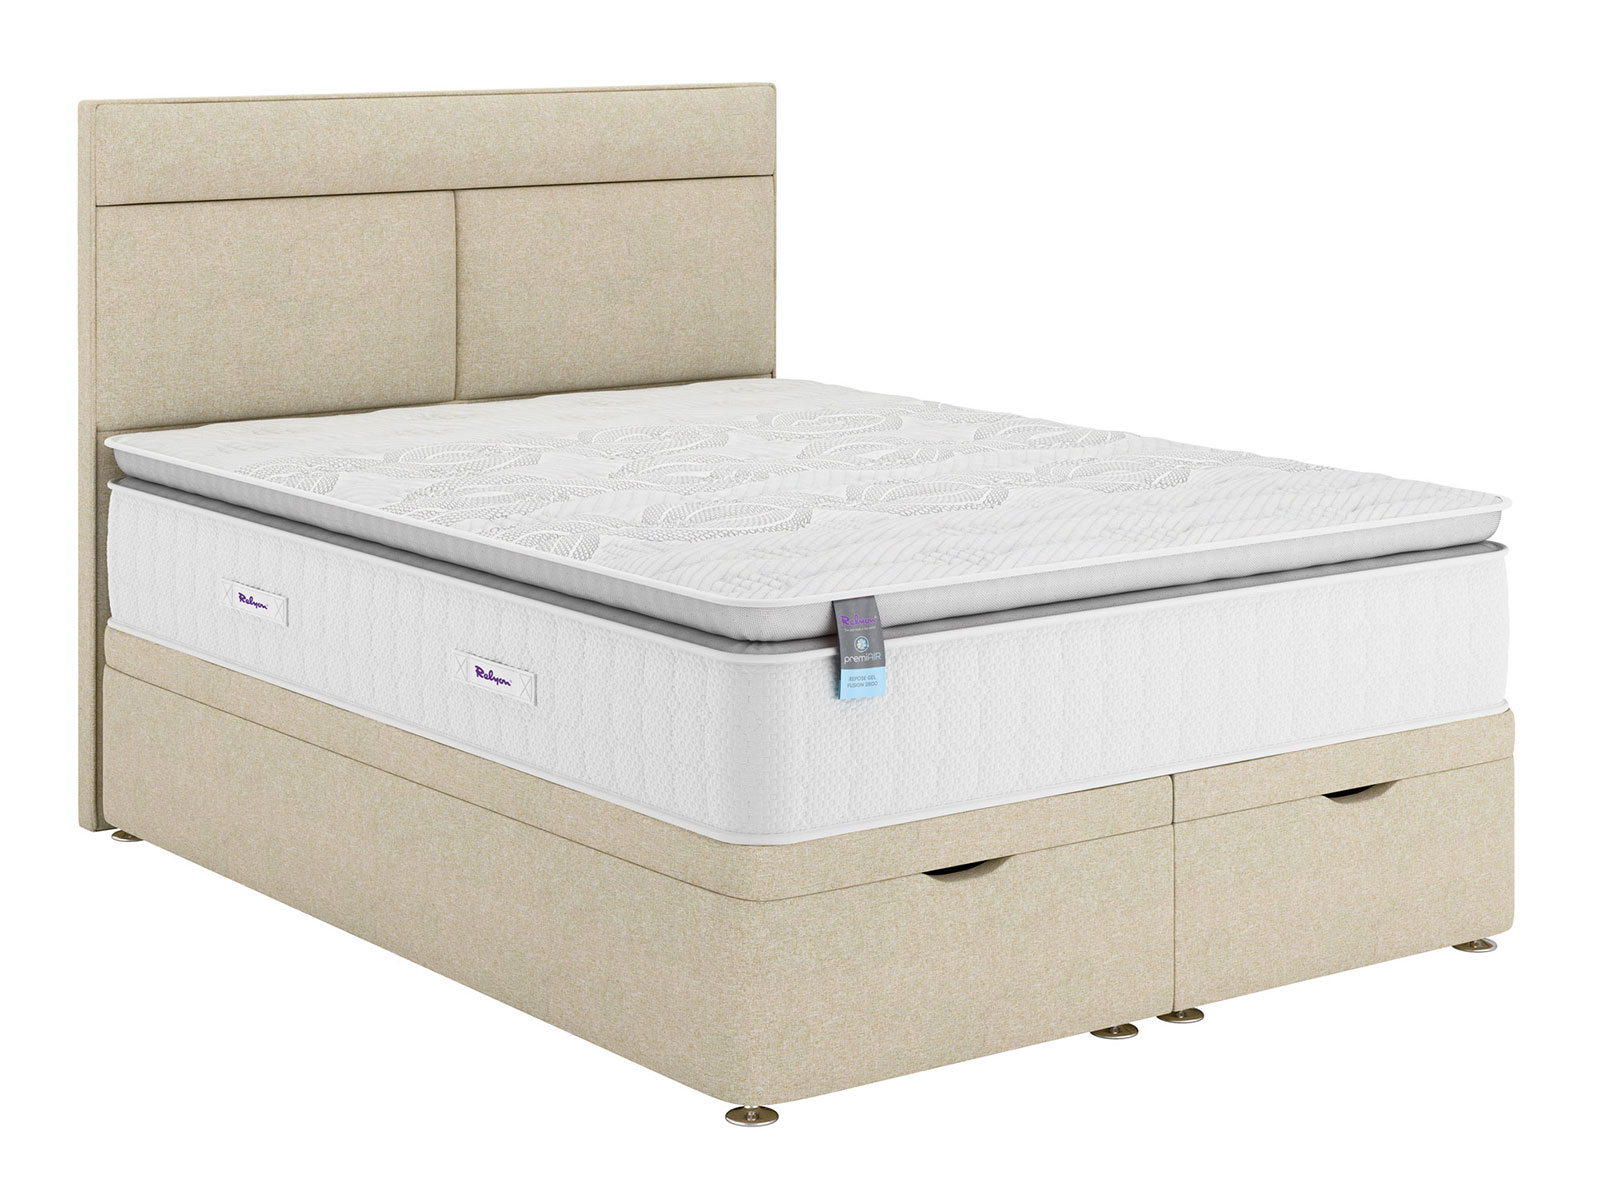 6ft Super King SIze Relyon Contemporary Gel Fusion 2800 Mattress